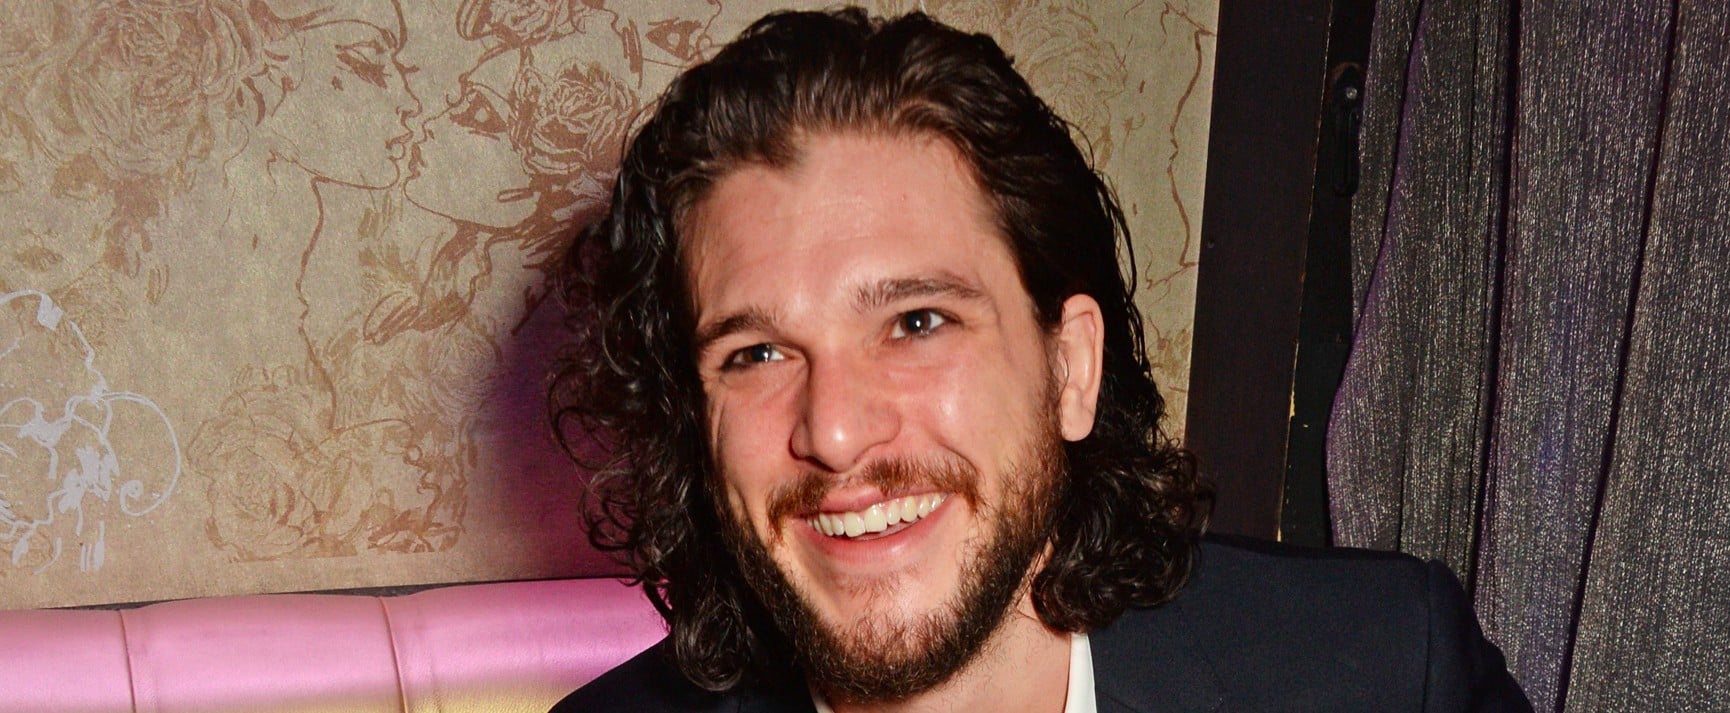 Kit Harington Quote About Losing His Virginity Popsugar Celebrity 3520